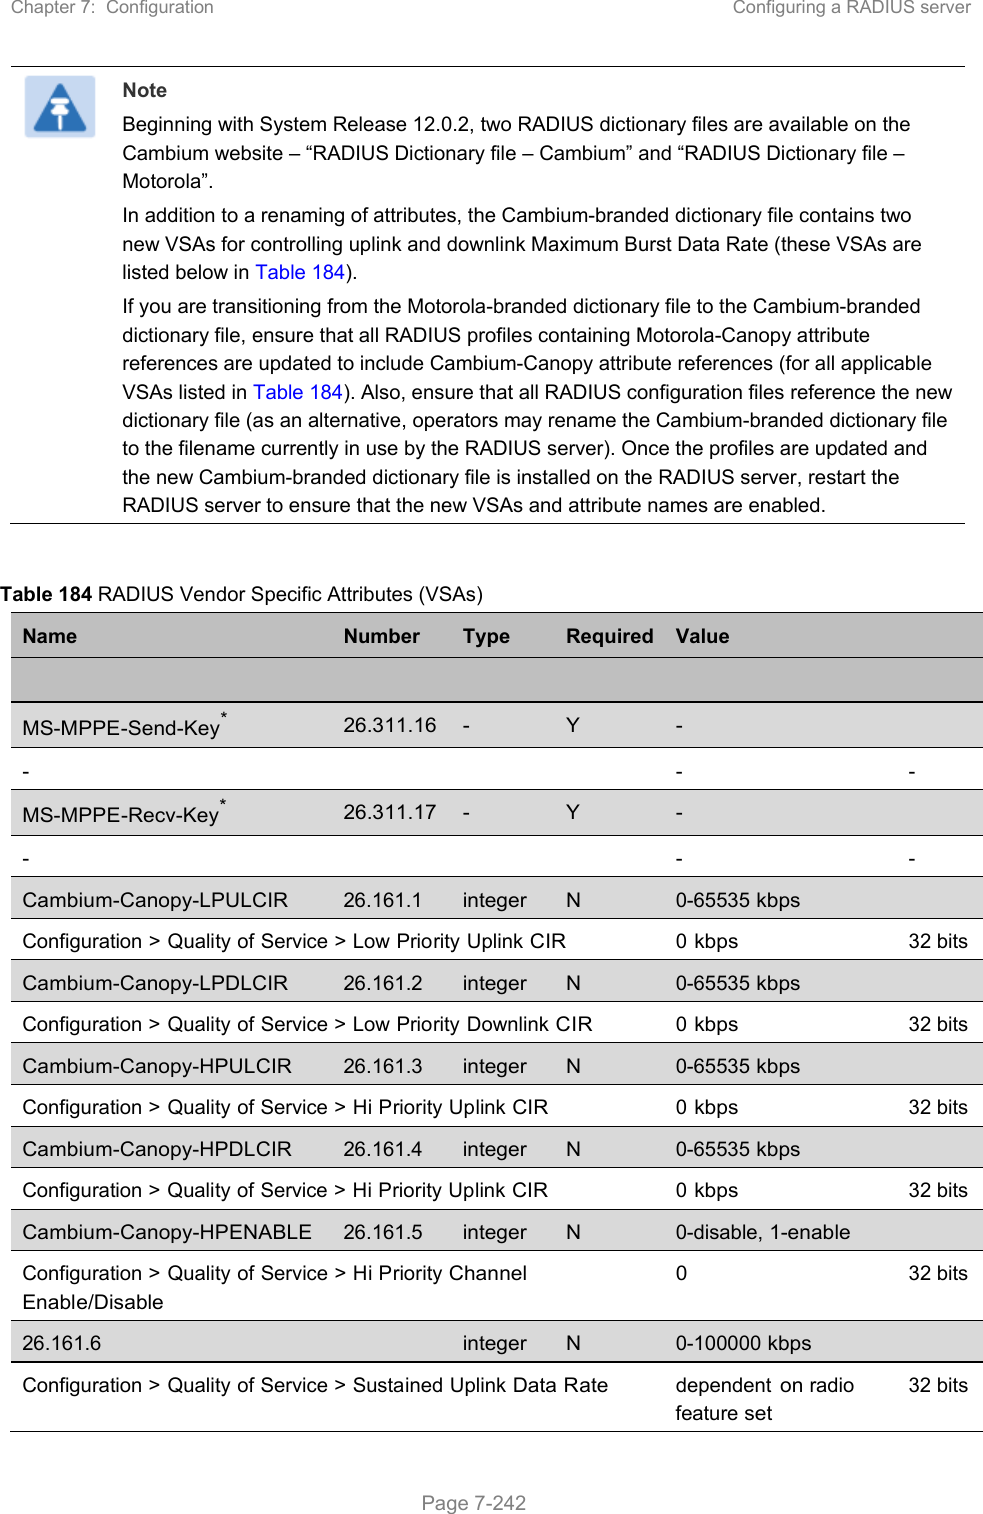 Chapter 7:  Configuration  Configuring a RADIUS server   Page 7-242  Note Beginning with System Release 12.0.2, two RADIUS dictionary files are available on the Cambium website – “RADIUS Dictionary file – Cambium” and “RADIUS Dictionary file – Motorola”. In addition to a renaming of attributes, the Cambium-branded dictionary file contains two new VSAs for controlling uplink and downlink Maximum Burst Data Rate (these VSAs are listed below in Table 184). If you are transitioning from the Motorola-branded dictionary file to the Cambium-branded dictionary file, ensure that all RADIUS profiles containing Motorola-Canopy attribute references are updated to include Cambium-Canopy attribute references (for all applicable VSAs listed in Table 184). Also, ensure that all RADIUS configuration files reference the new dictionary file (as an alternative, operators may rename the Cambium-branded dictionary file to the filename currently in use by the RADIUS server). Once the profiles are updated and the new Cambium-branded dictionary file is installed on the RADIUS server, restart the RADIUS server to ensure that the new VSAs and attribute names are enabled.  Table 184 RADIUS Vendor Specific Attributes (VSAs) Name  Number  Type  Required Value              MS-MPPE-Send-Key* 26.311.16 - Y -   -    - - MS-MPPE-Recv-Key* 26.311.17 - Y -   -       - - Cambium-Canopy-LPULCIR 26.161.1 integer  N 0-65535 kbps   Configuration &gt; Quality of Service &gt; Low Priority Uplink CIR 0 kbps  32 bits Cambium-Canopy-LPDLCIR 26.161.2 integer  N 0-65535 kbps   Configuration &gt; Quality of Service &gt; Low Priority Downlink CIR 0 kbps  32 bits Cambium-Canopy-HPULCIR 26.161.3 integer N 0-65535 kbps   Configuration &gt; Quality of Service &gt; Hi Priority Uplink CIR 0 kbps  32 bits Cambium-Canopy-HPDLCIR 26.161.4 integer N 0-65535 kbps   Configuration &gt; Quality of Service &gt; Hi Priority Uplink CIR 0 kbps  32 bits Cambium-Canopy-HPENABLE 26.161.5 integer N 0-disable, 1-enable   Configuration &gt; Quality of Service &gt; Hi Priority Channel Enable/Disable 0  32 bits 26.161.6  integer N 0-100000 kbps   Configuration &gt; Quality of Service &gt; Sustained Uplink Data Rate  dependent on radio feature set 32 bits 